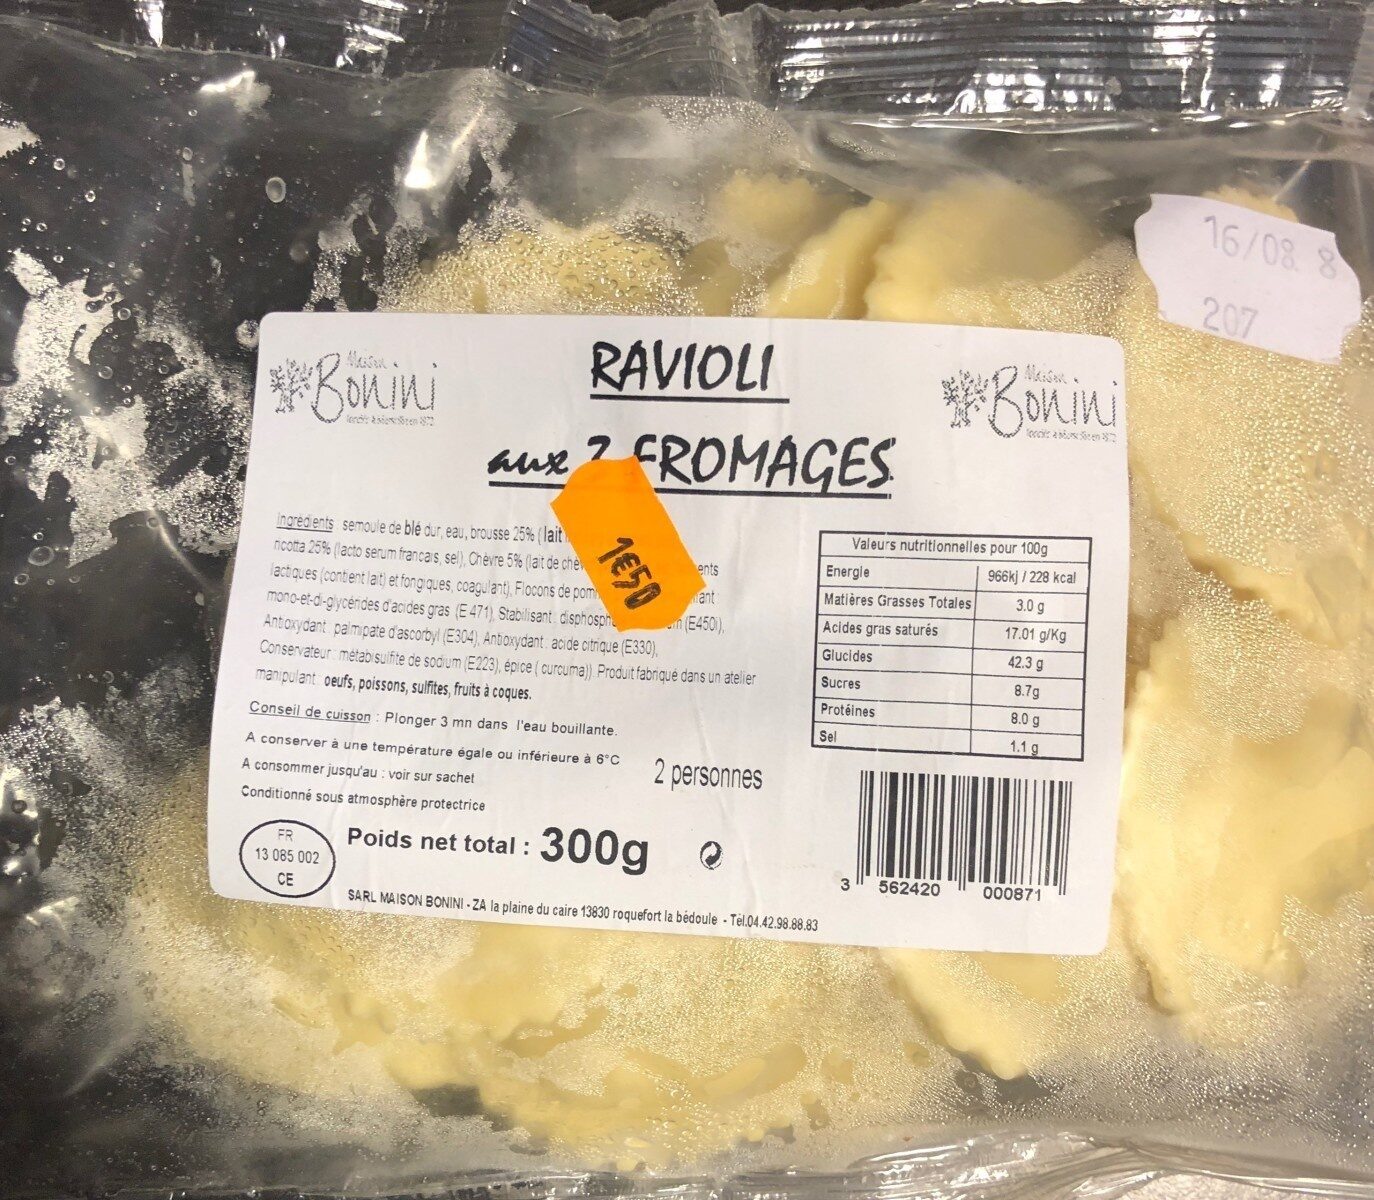 Ravioli aux 3 fromages - Product - fr